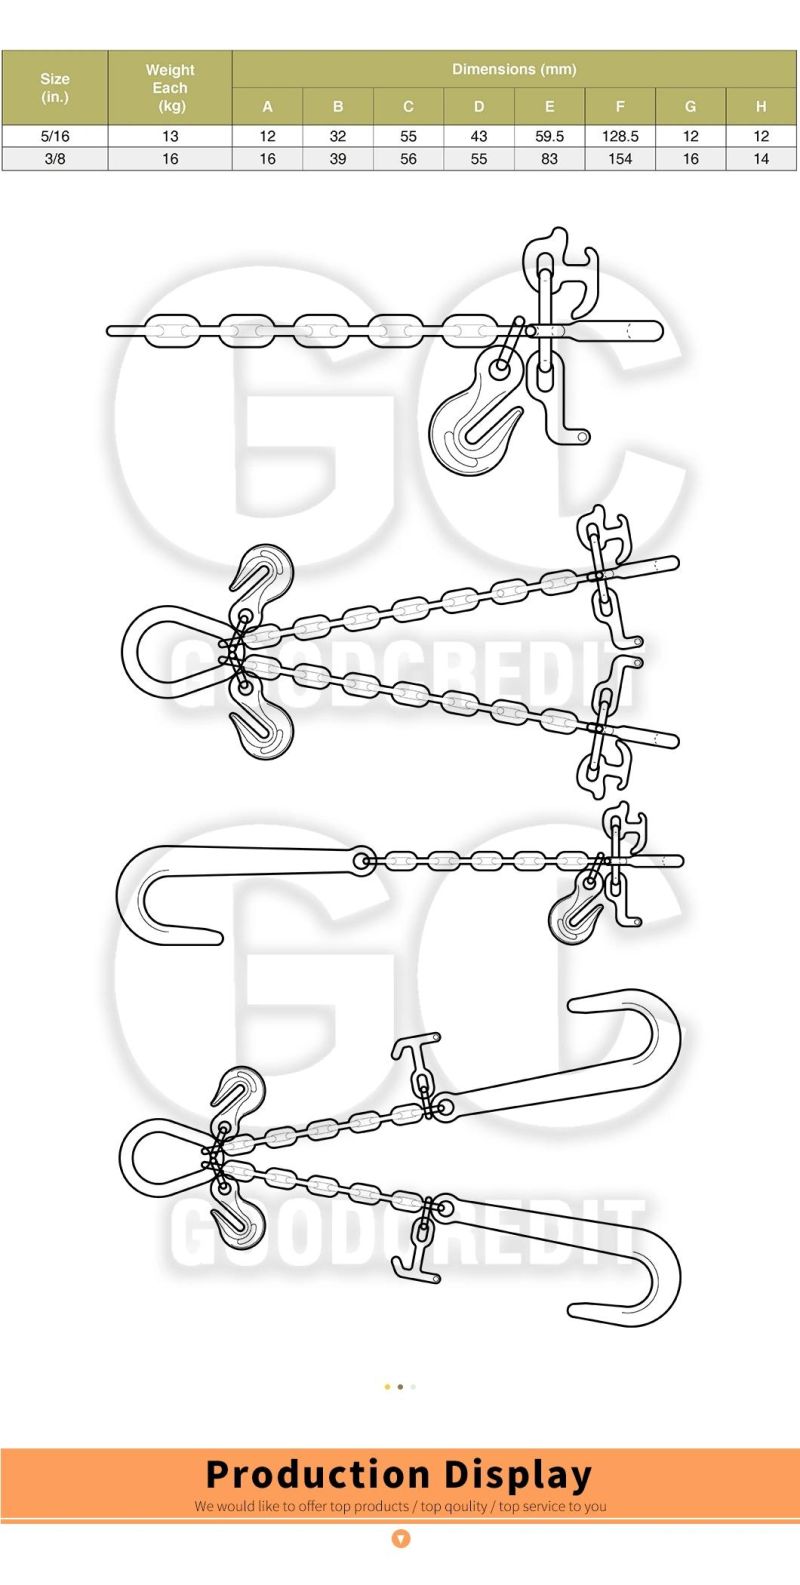 Factory Grade 70 Grade 80 Yellow Zinc Plated Binder Chain with Clevis Hook